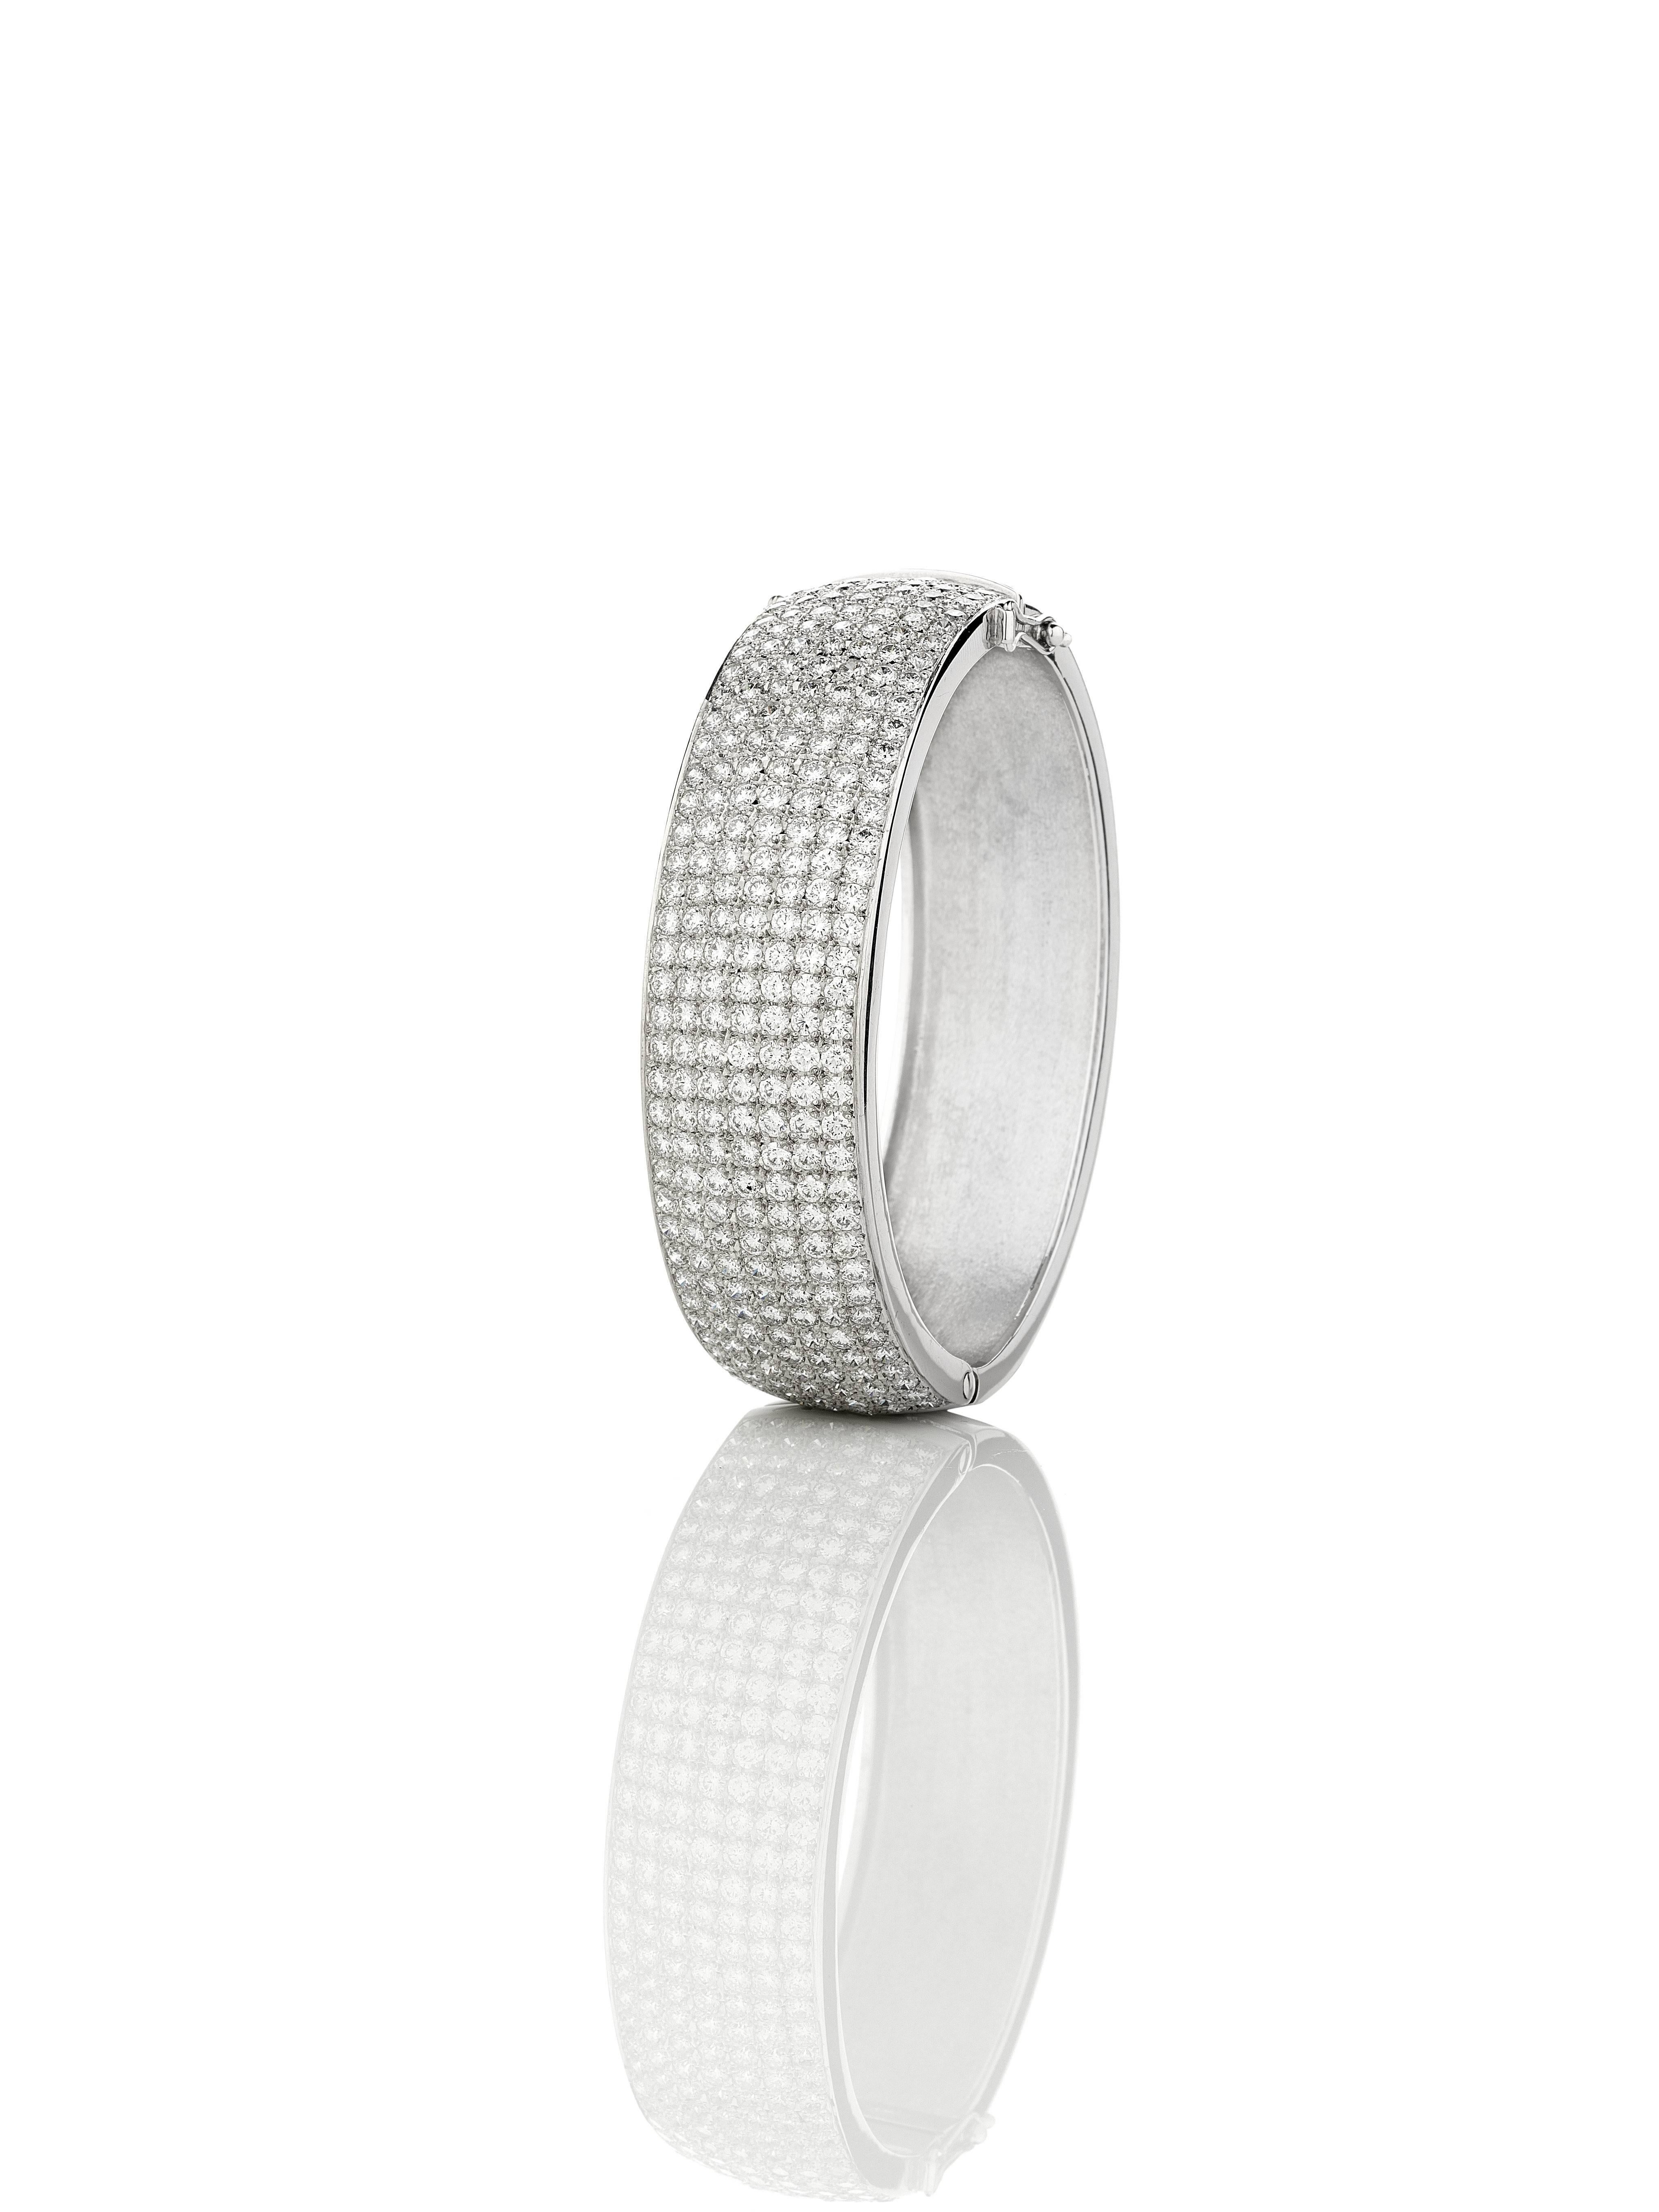 This 18kt white gold diamond pave hinged bangle is set with 252 diamonds totalling 14.00cts, G/H Colour, Si1 Clarity. The diamonds are set on the top half only with a polished back.

The bangle is 20mm wide, hinged with tongue and box clasp and two